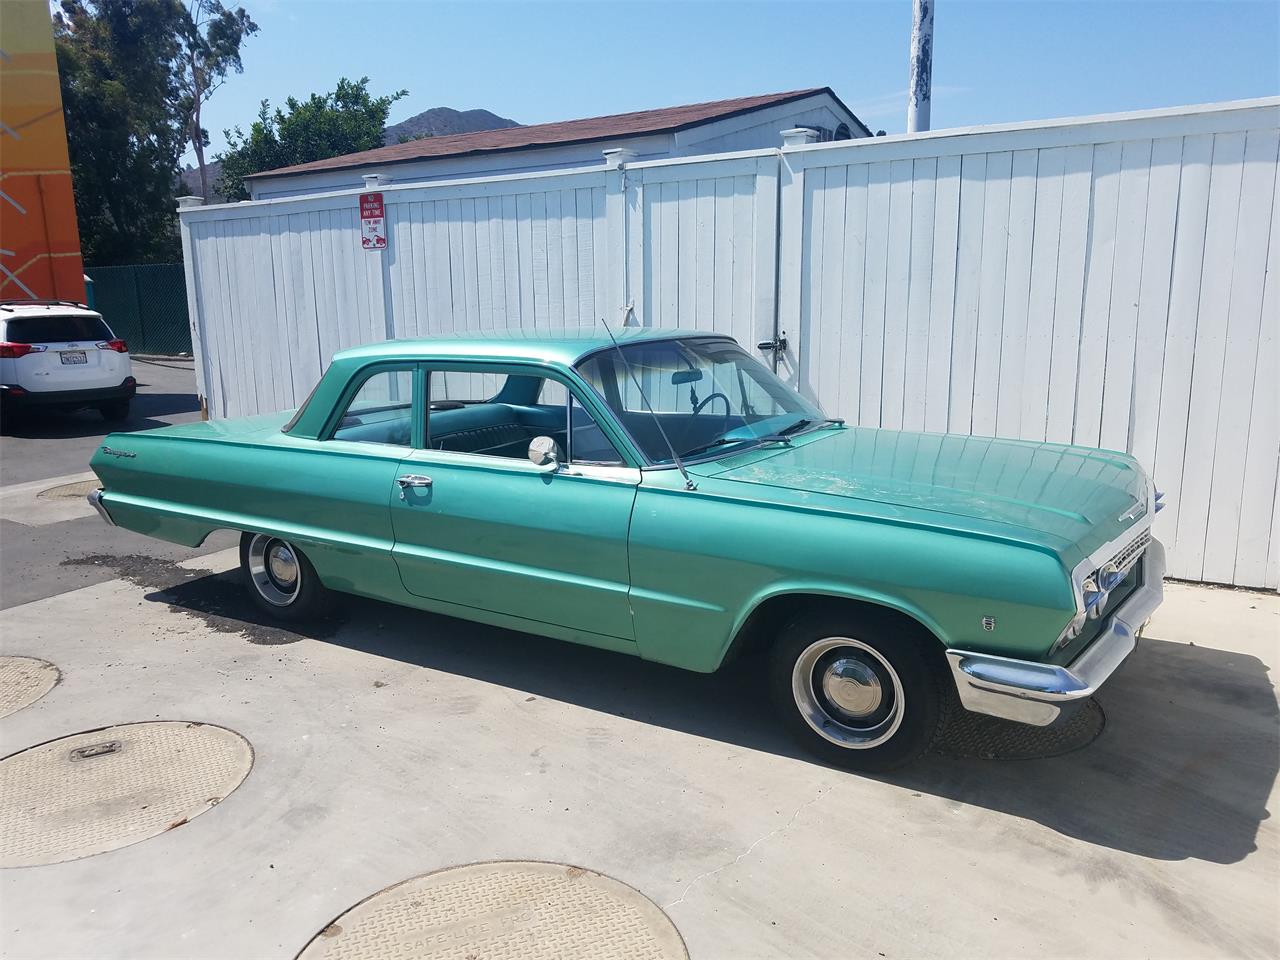 1963 chevrolet biscayne for sale in pacific palisades ca classiccarsbay com 1963 chevrolet biscayne for sale in